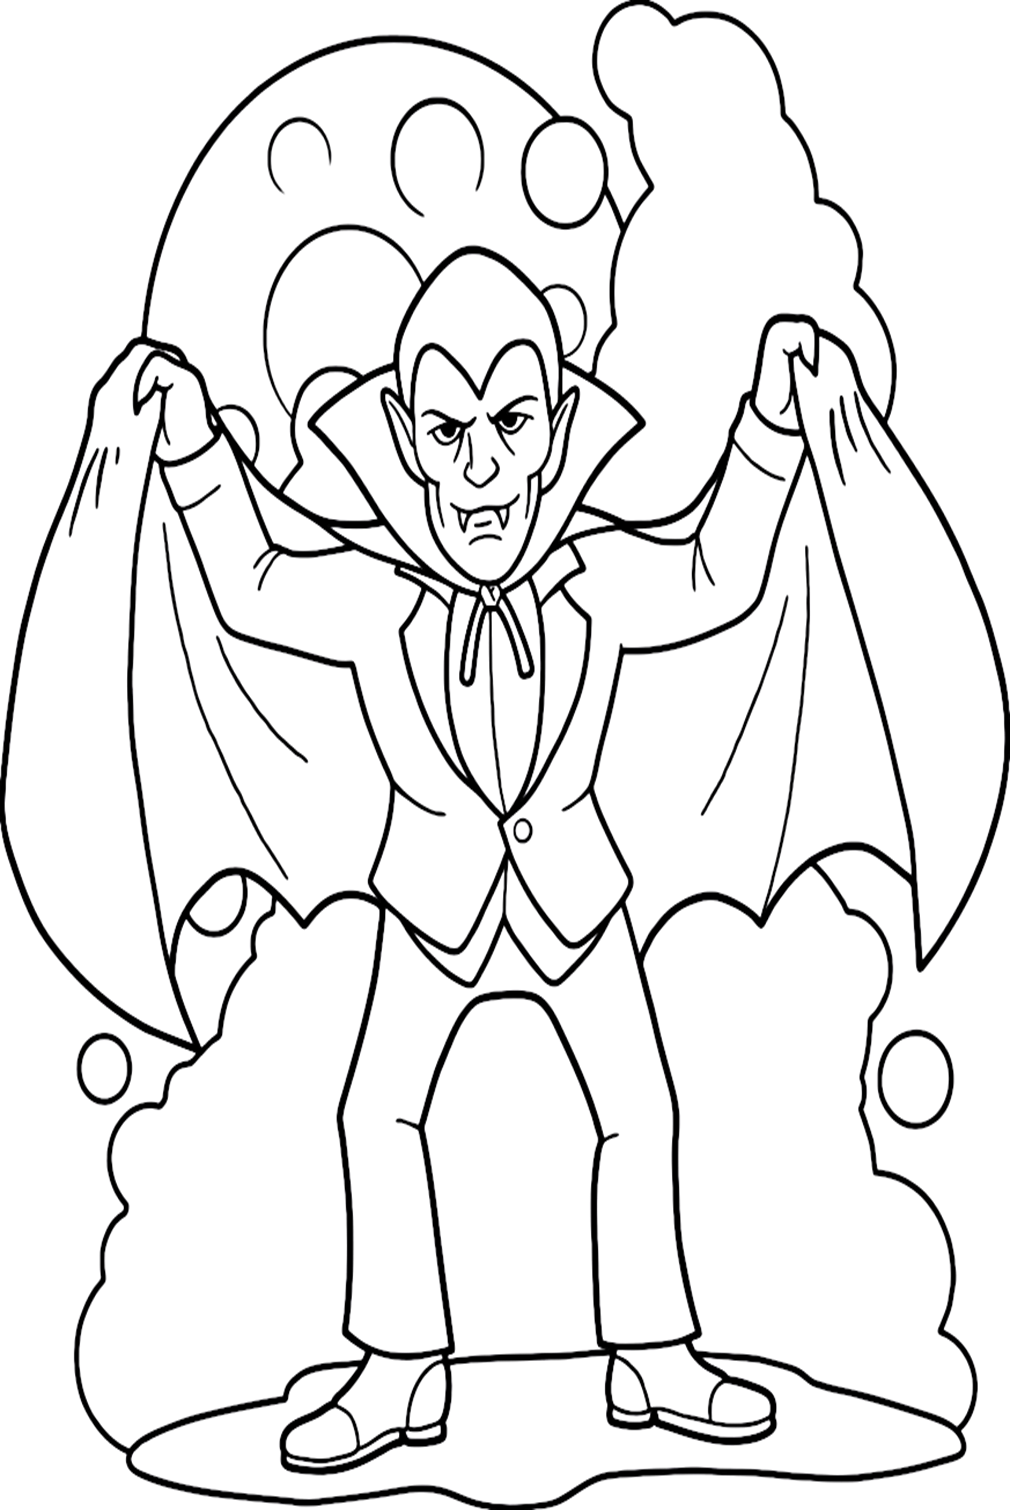 Free Printable Vampire Coloring Pages - Free Printable Coloring Pages